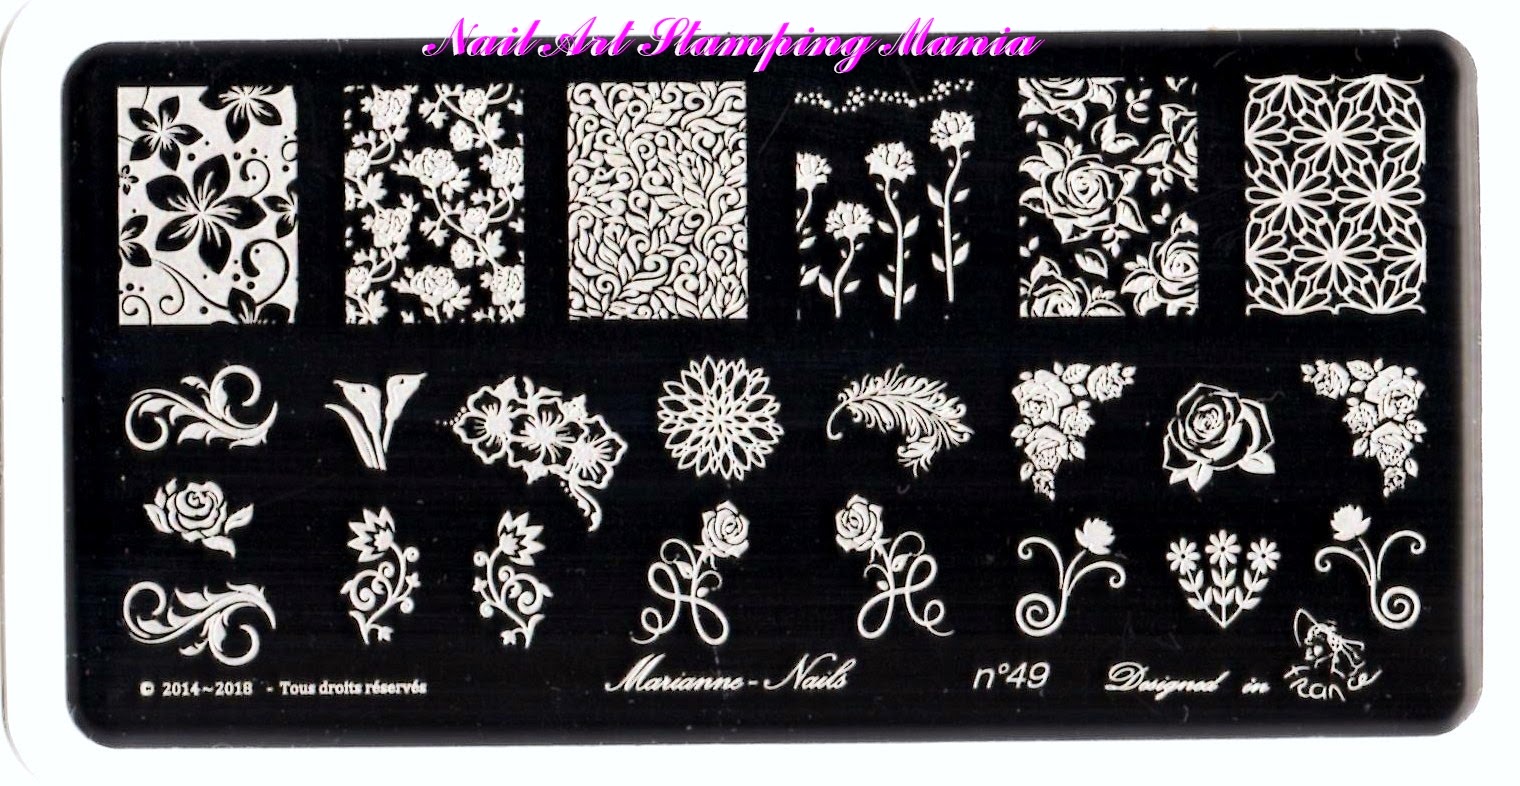 Nail Art Stamping Mania: Marianne - Nails Plates Swatches And Review